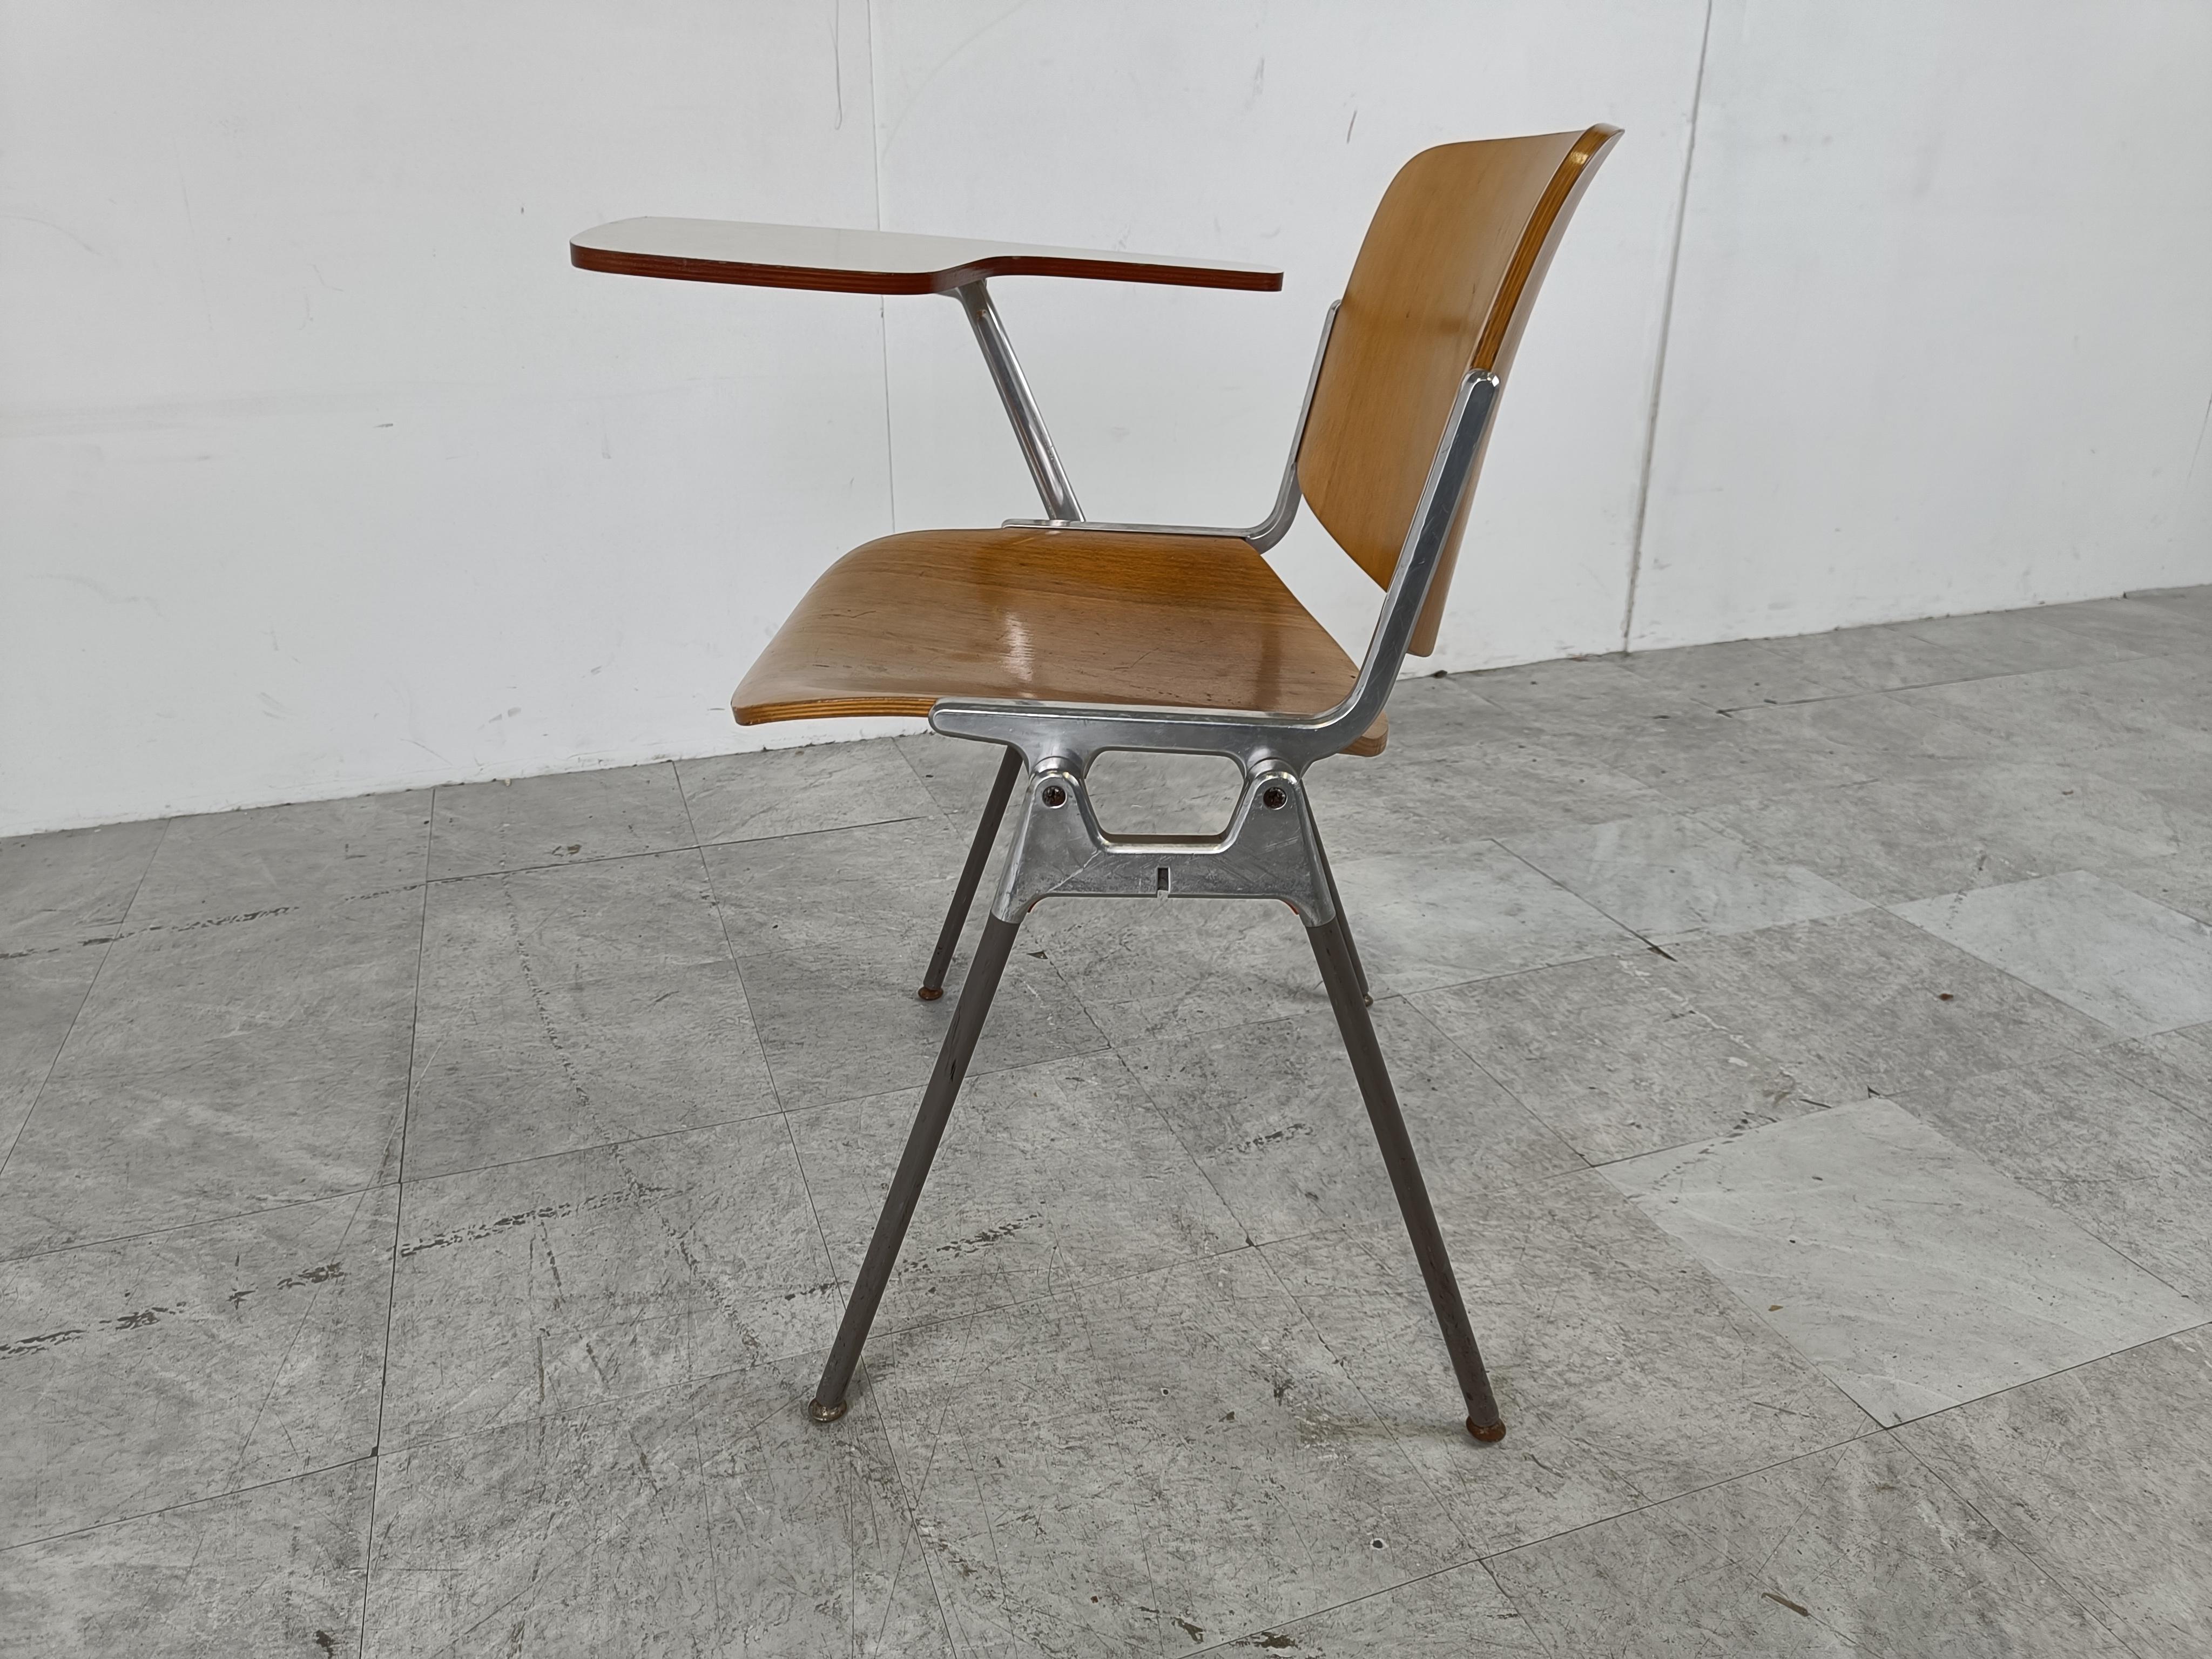 Vintage Dsc 106 Chair by Giancarlo Piretti for Castelli with Folding Table, 1970 For Sale 1